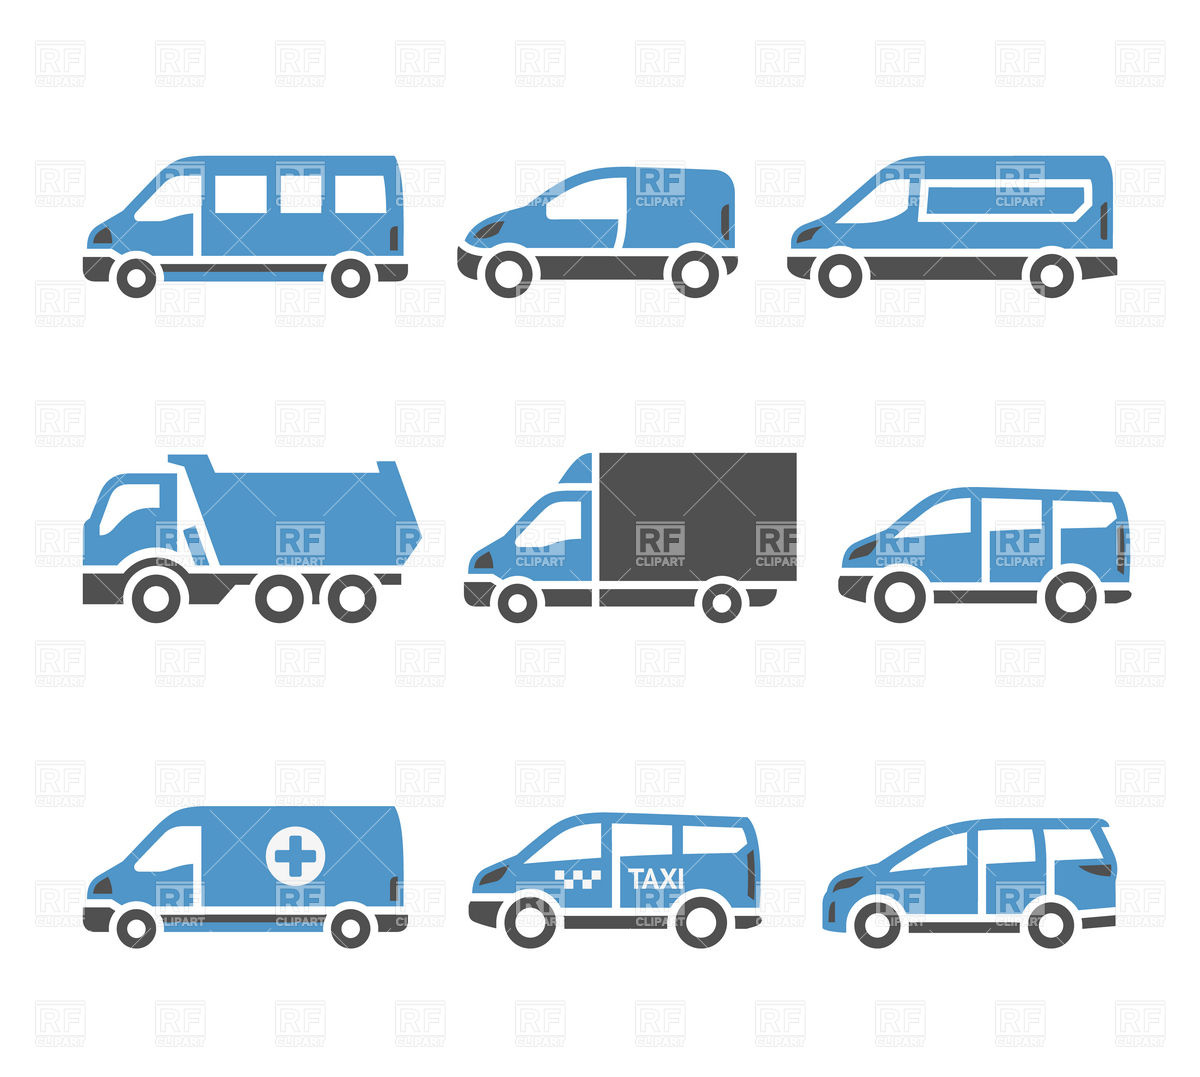 Van 17860 Icons And Emblems Download Royalty Free Vector Clip Art